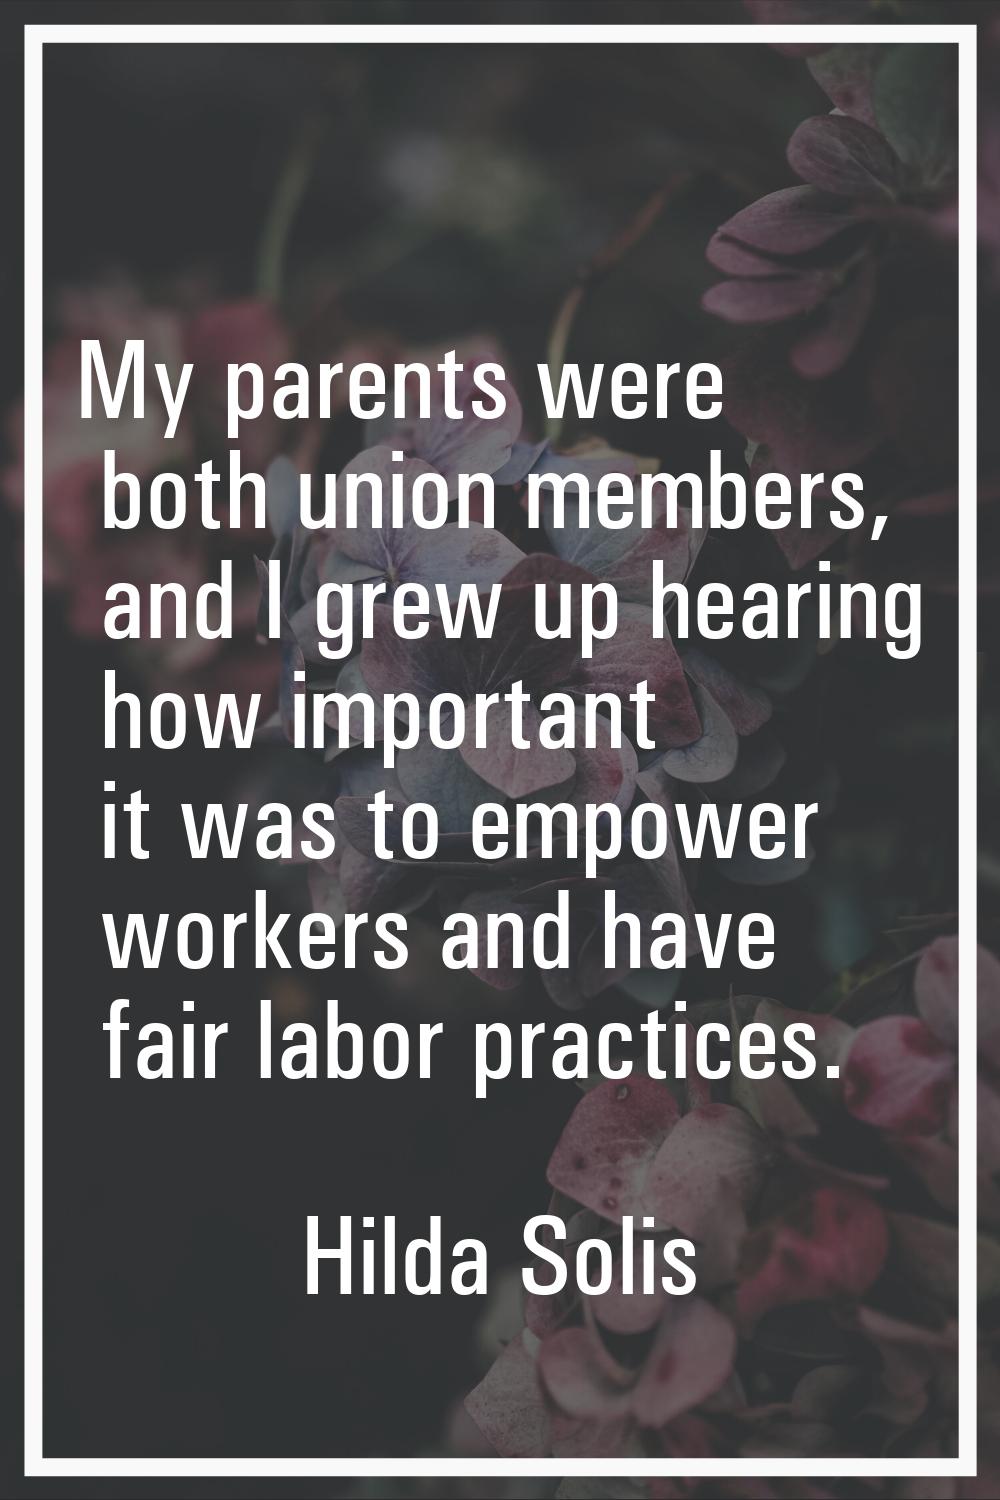 My parents were both union members, and I grew up hearing how important it was to empower workers a